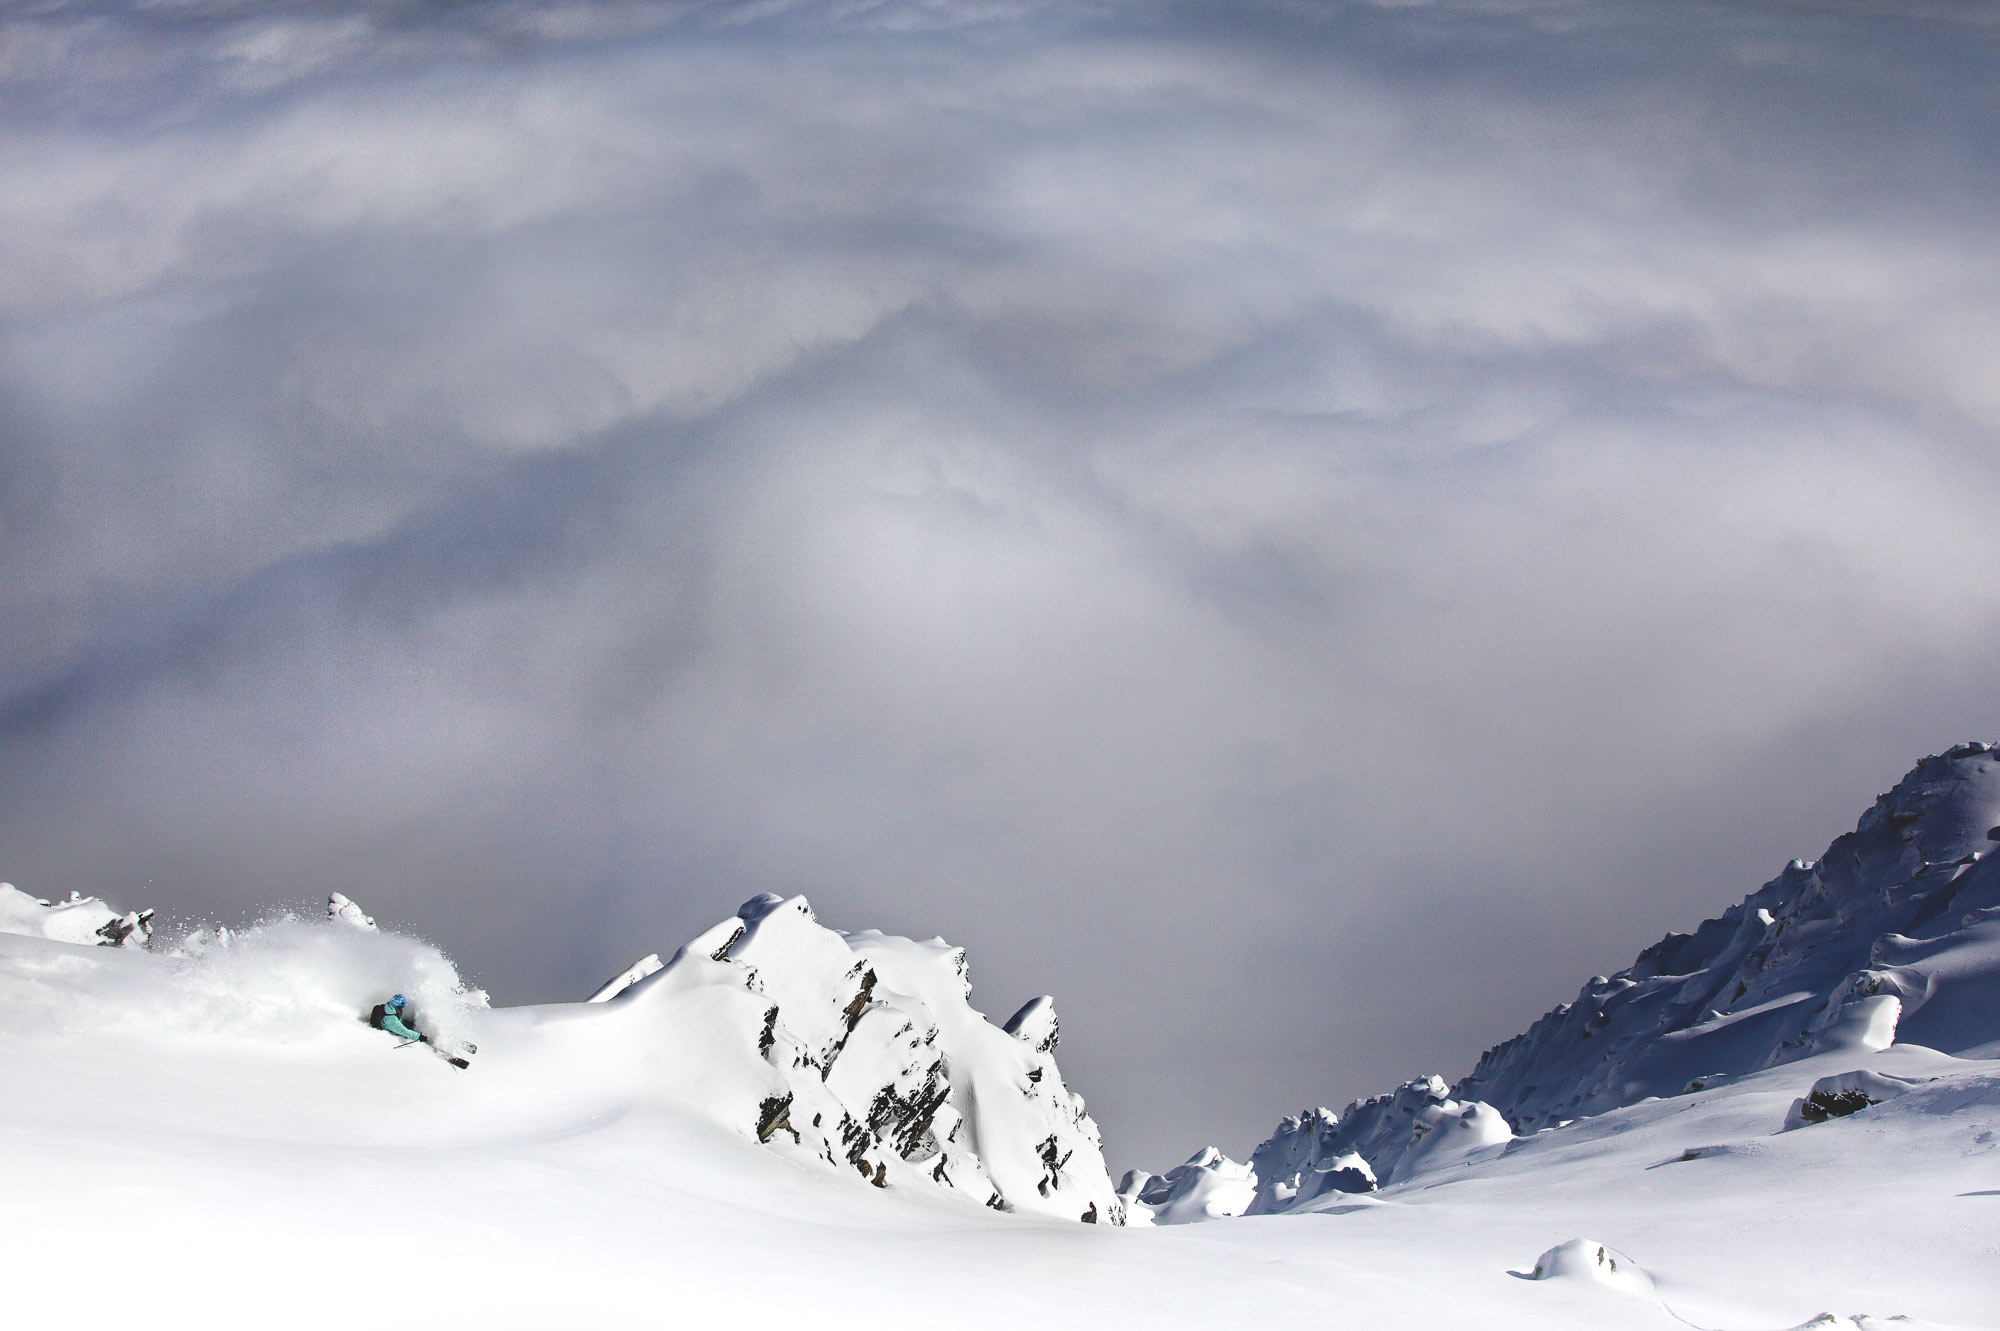 Free Skier Pete Oswald Skiing powder above clouds up The Remarkables